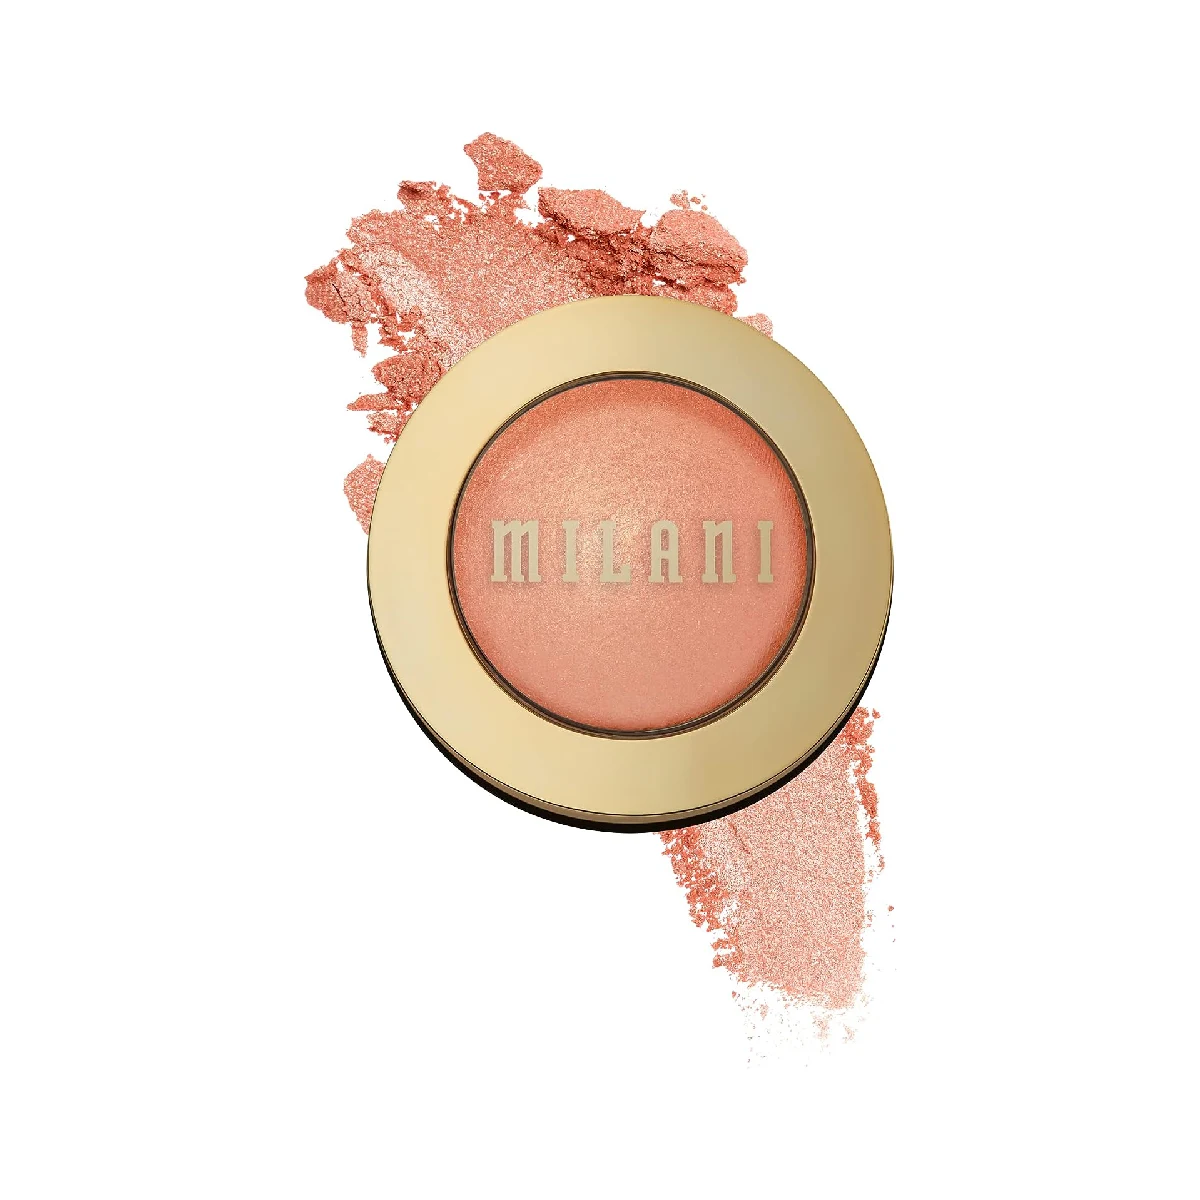 Milani Baked Blush - a radiant blush compact on a white background